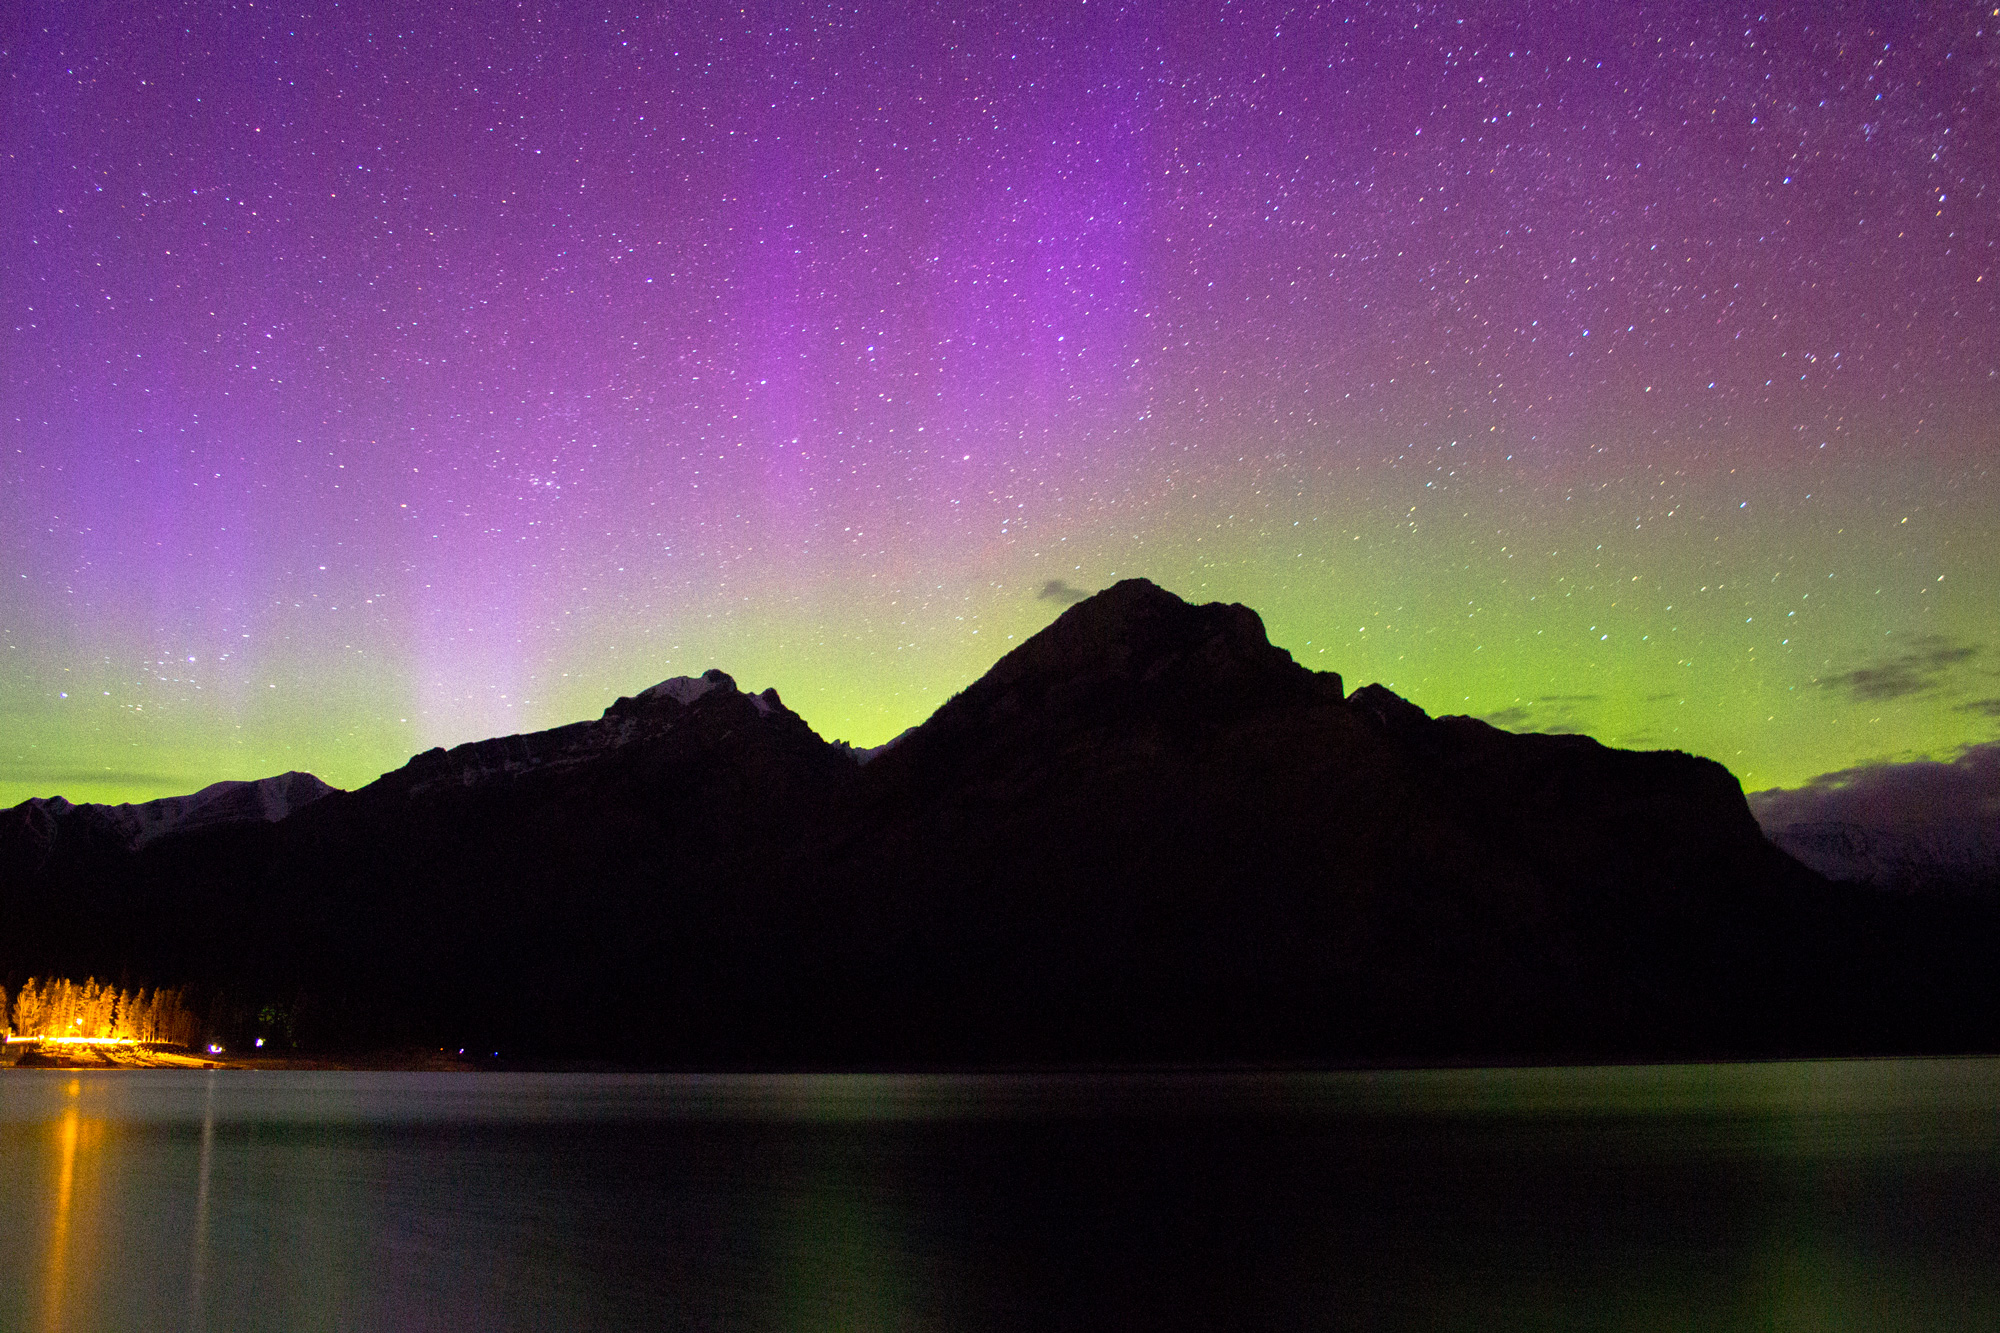 Catching the Northern Lights at Lake Minnewanka is one of the top things to do in Banff